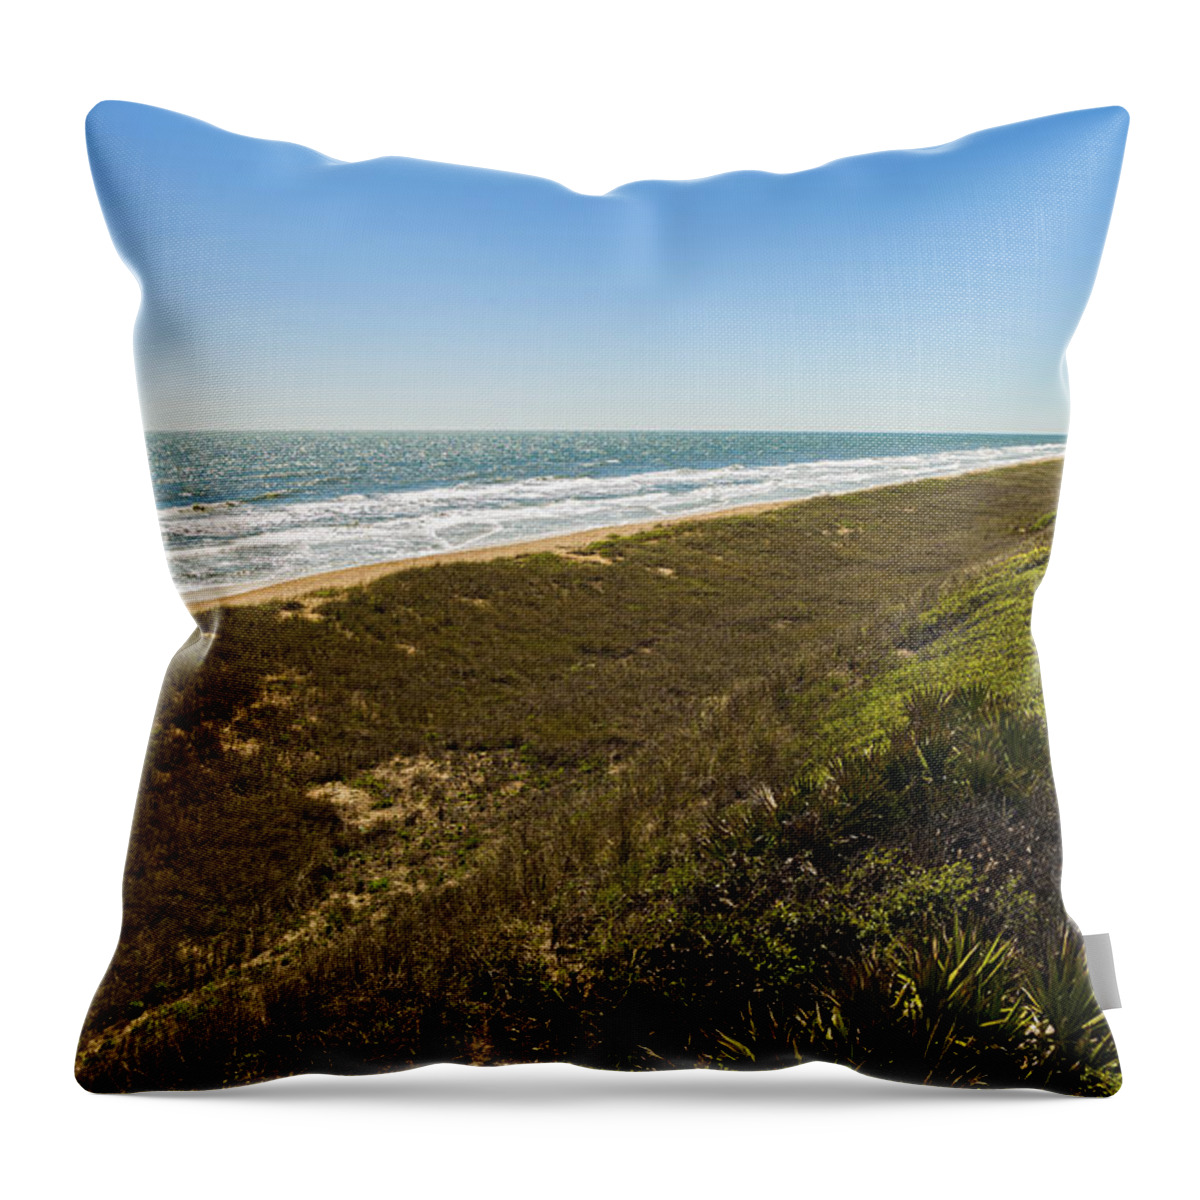 Atlantic Ocean Throw Pillow featuring the photograph Ponte Vedra Beach #4 by Raul Rodriguez